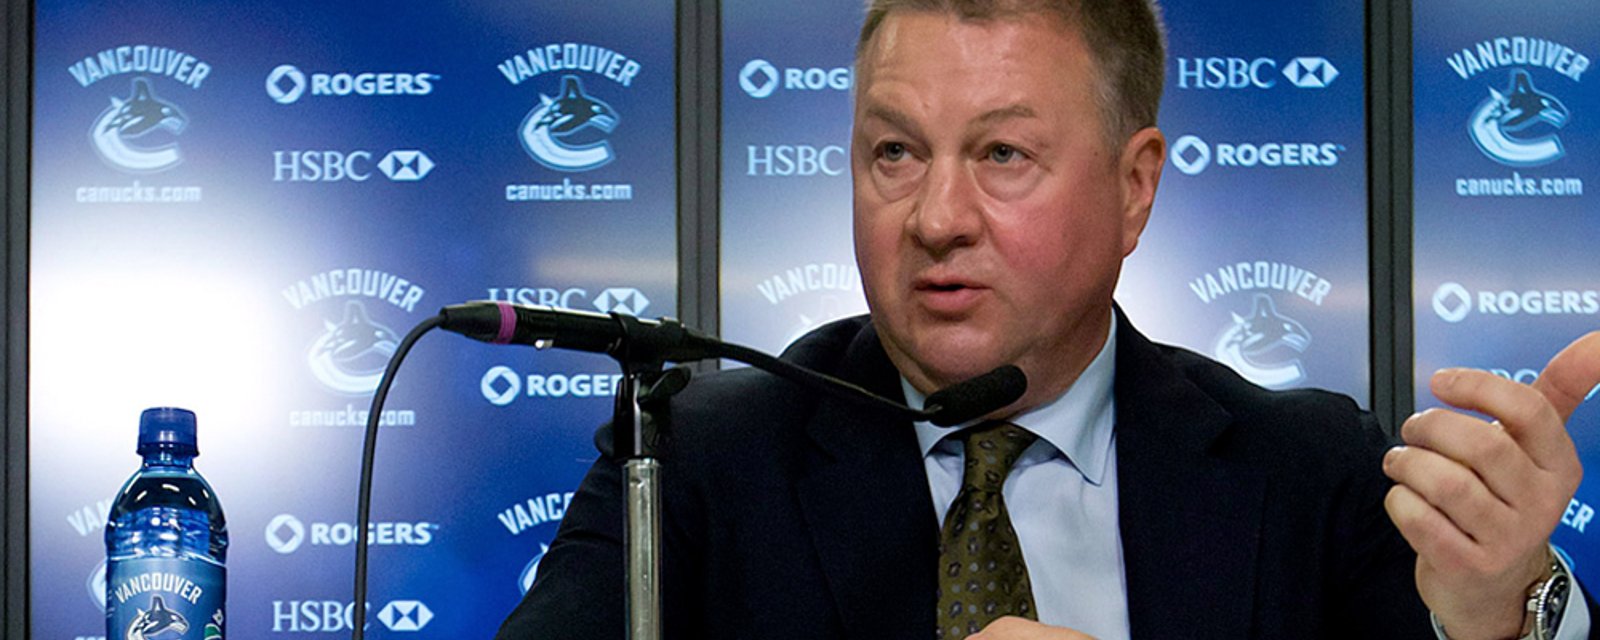 Former Canucks GM Mike Gillis to join rival team?